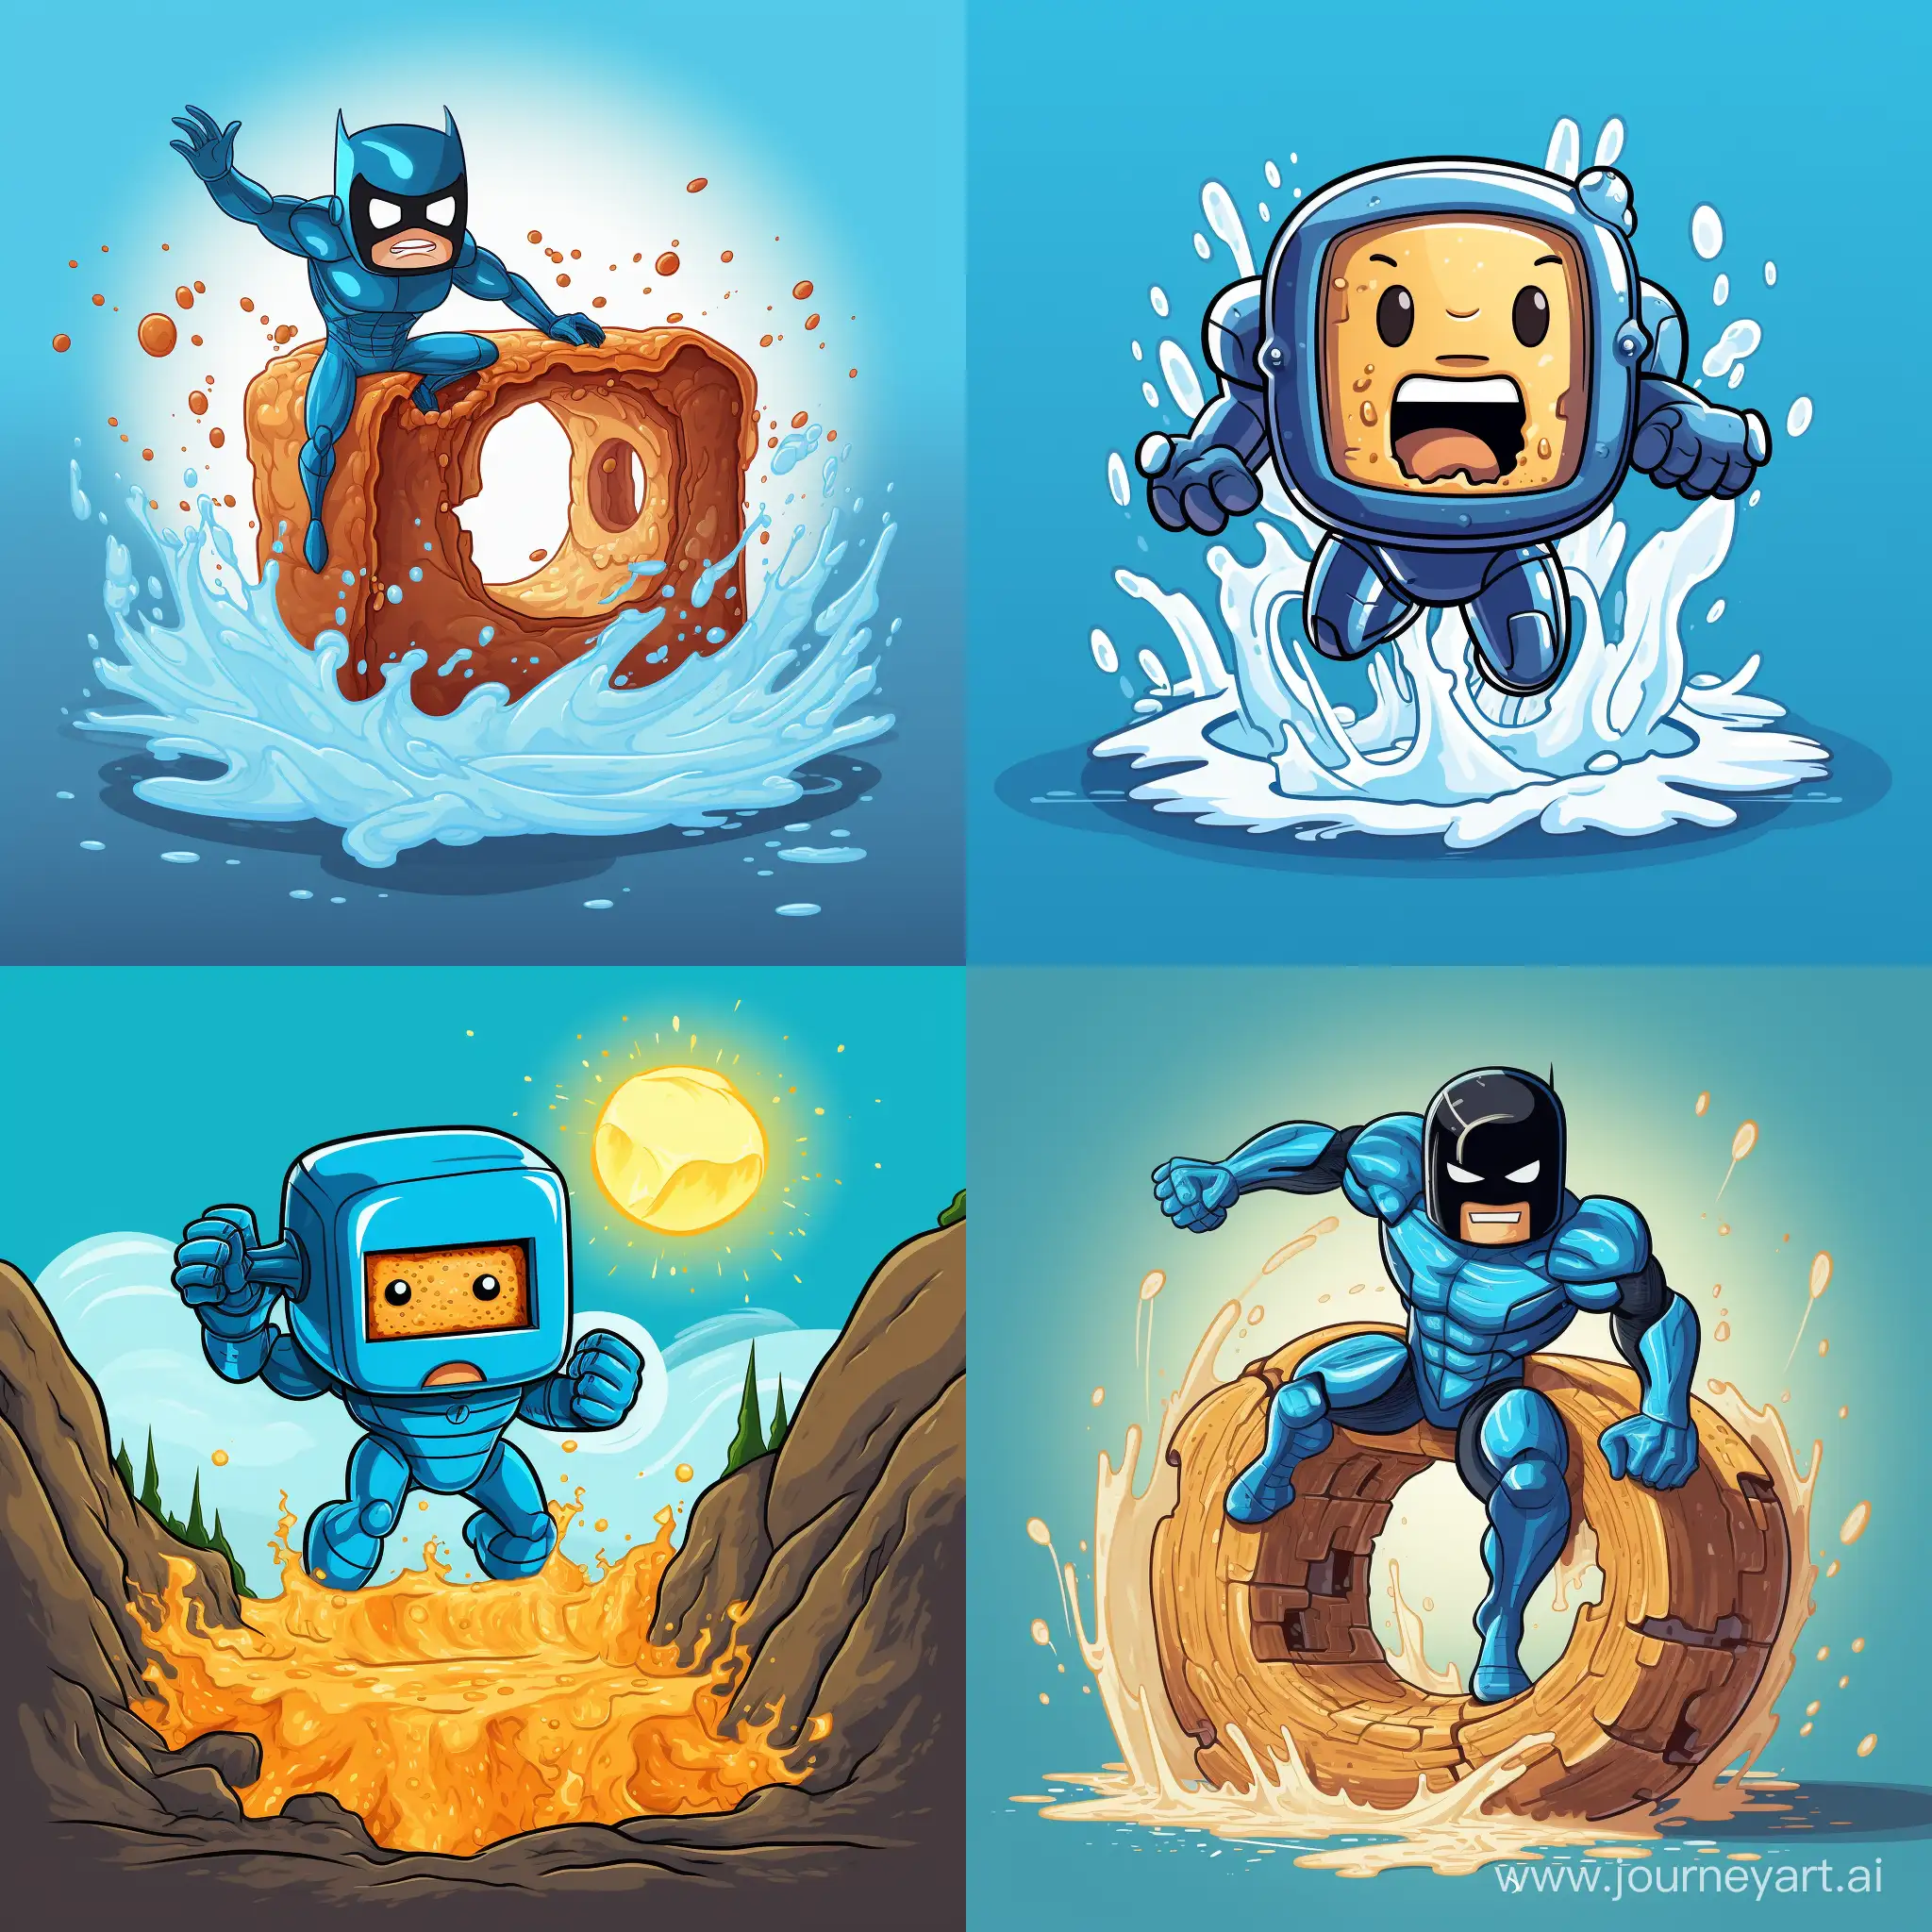 A toaster superhero coming out of a blue hole